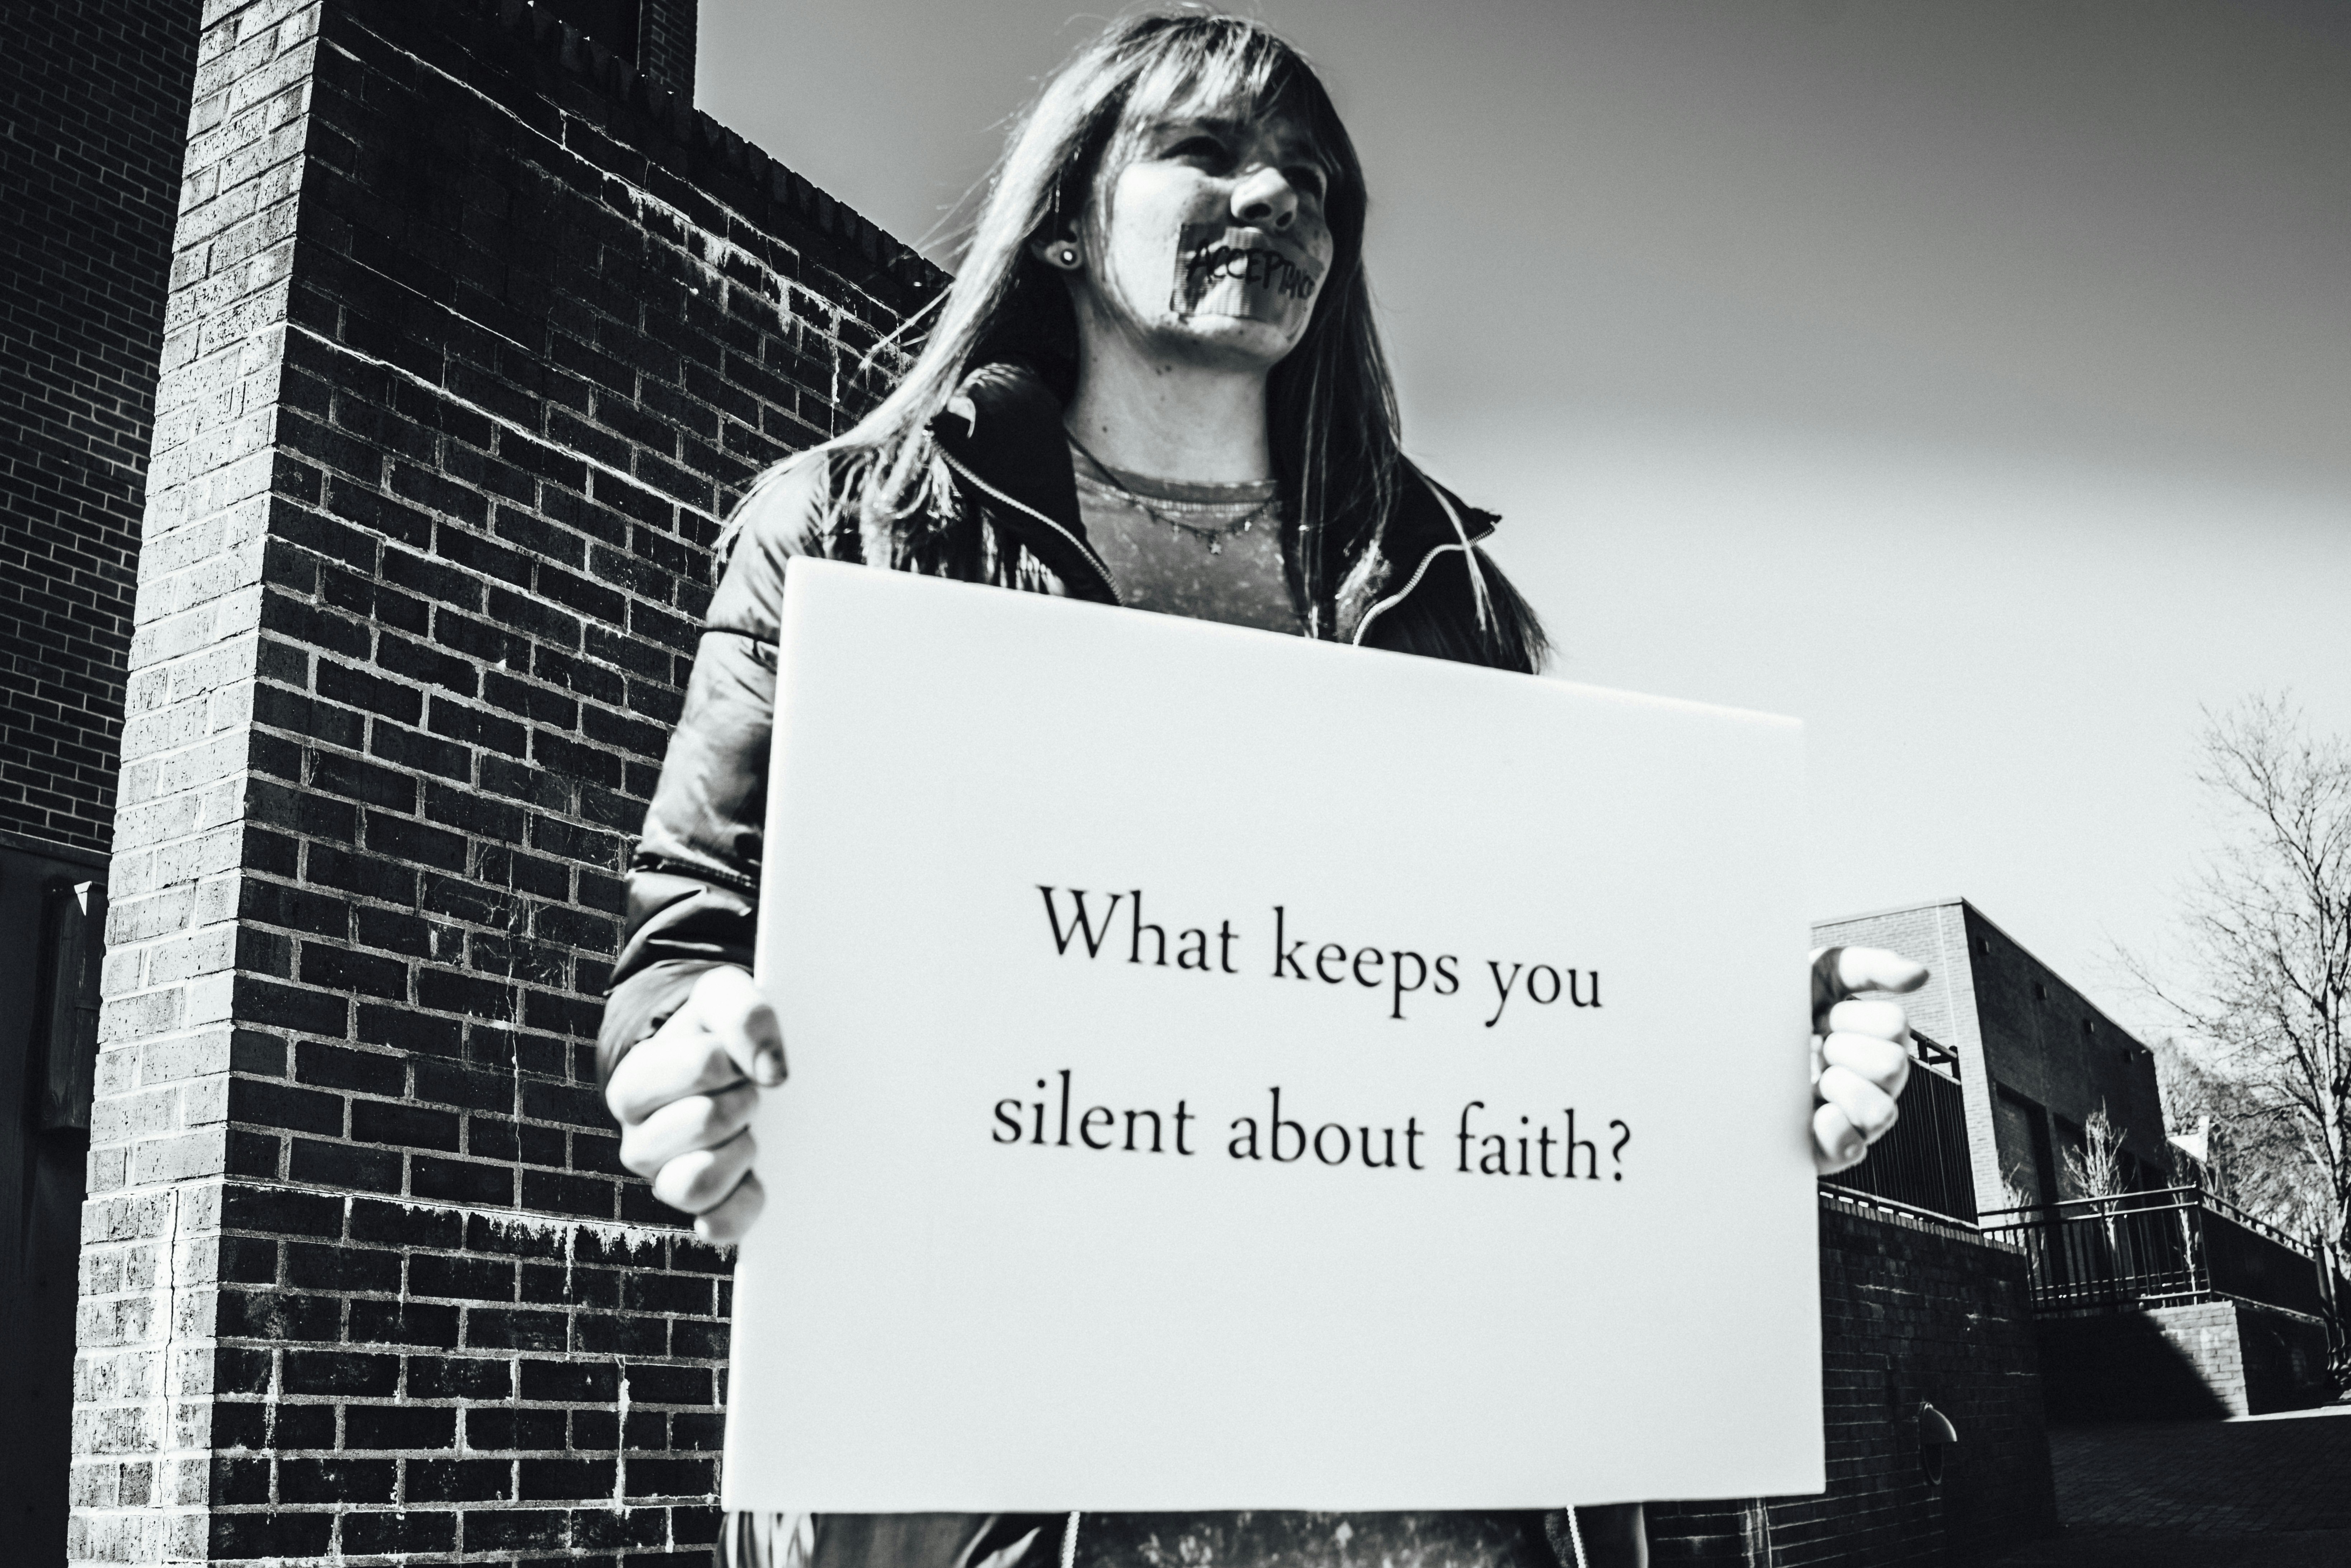 I found this woman on the corner of the school campus holding up this message with tape over her mouth written on it the word “ACCEPTANCE” this being her answer to the question she posed “WHAT KEEPS YOU SILENT ABOUT FAITH?” and so I say what is it our answer for us